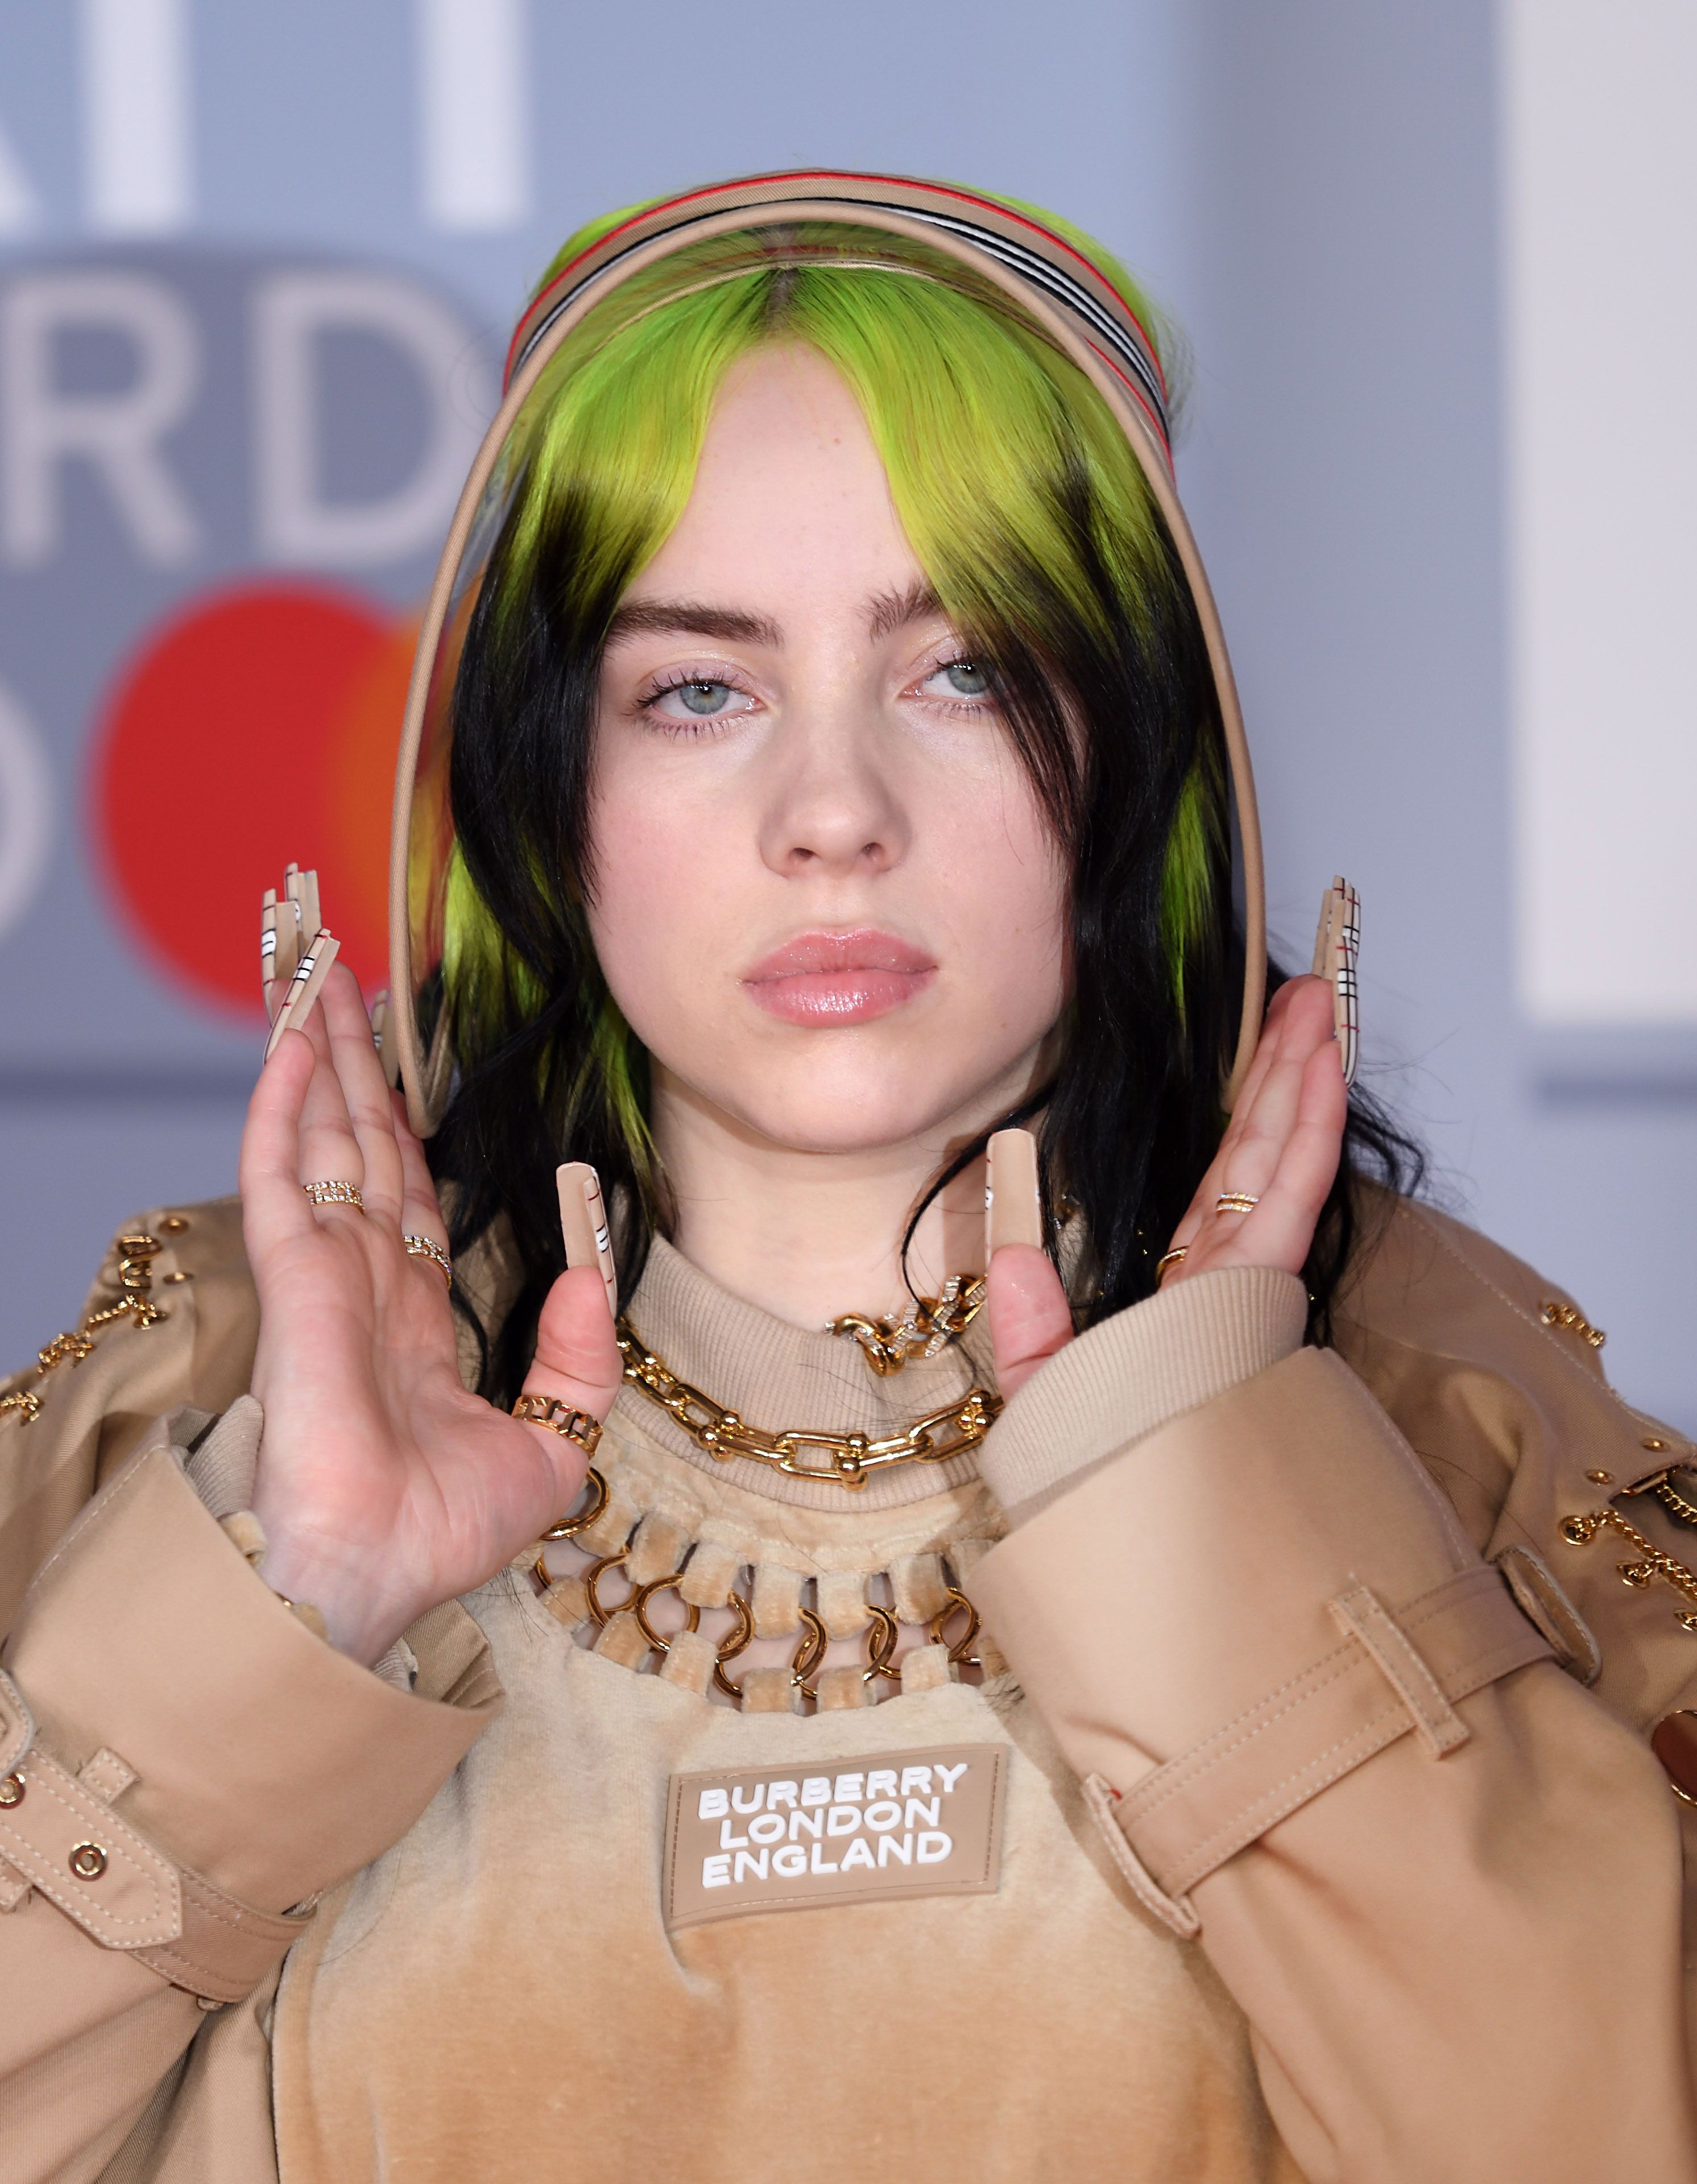 Billie Eilish begs fans to stop making fun of her neon green hair